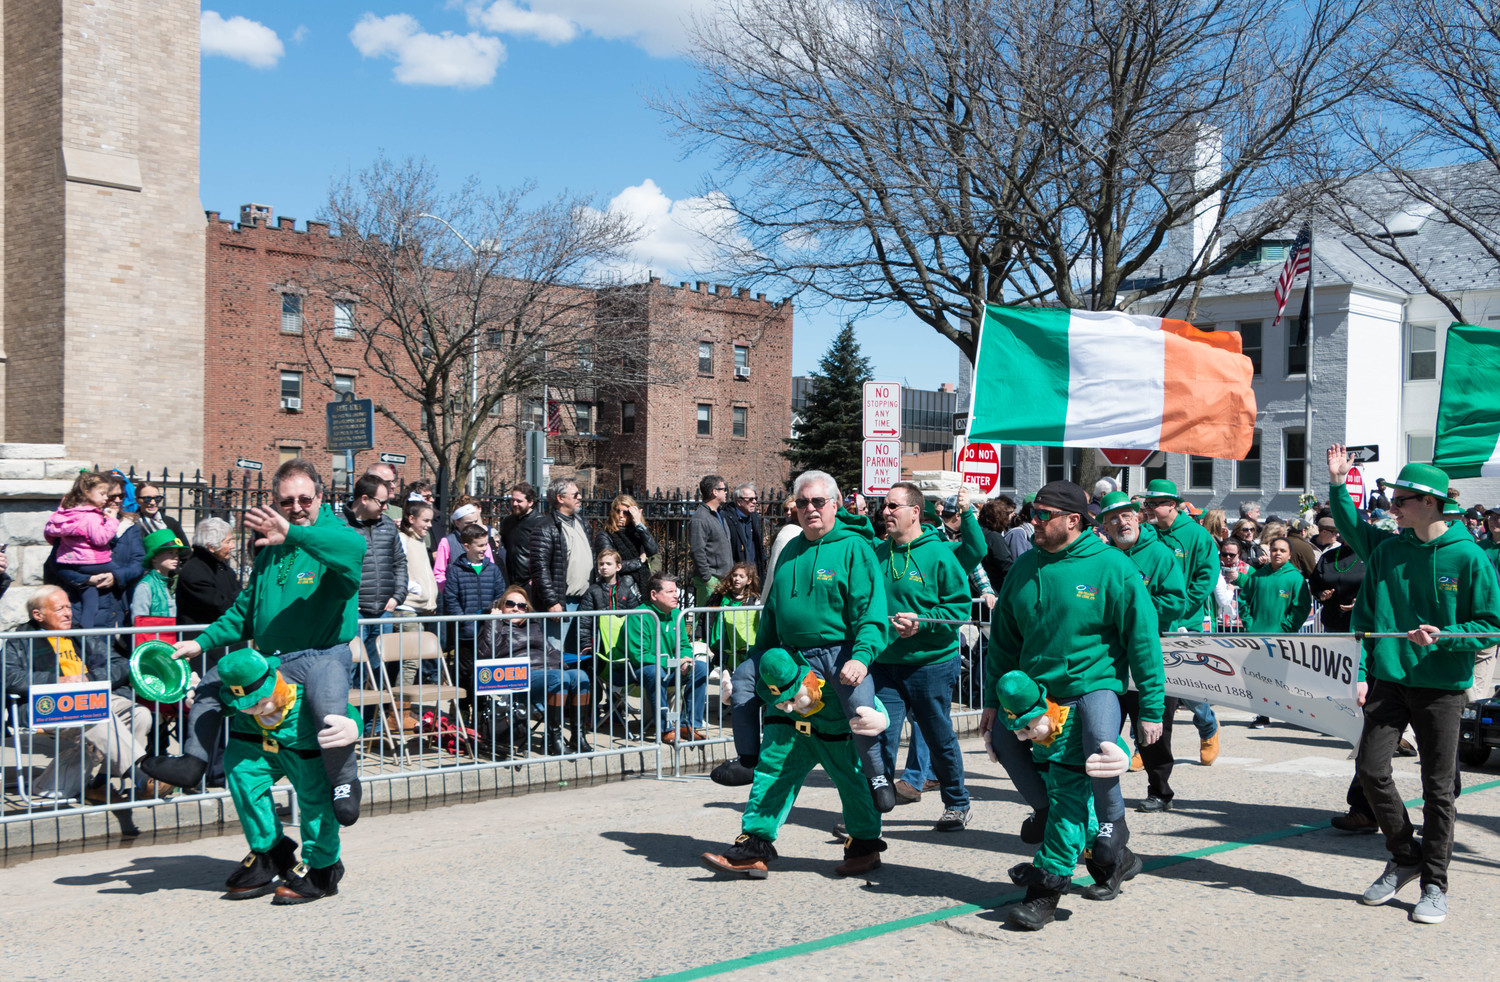 The Odd Fellows of Rockville Centre were among the marchers in the St. Patrick's Parade last March.